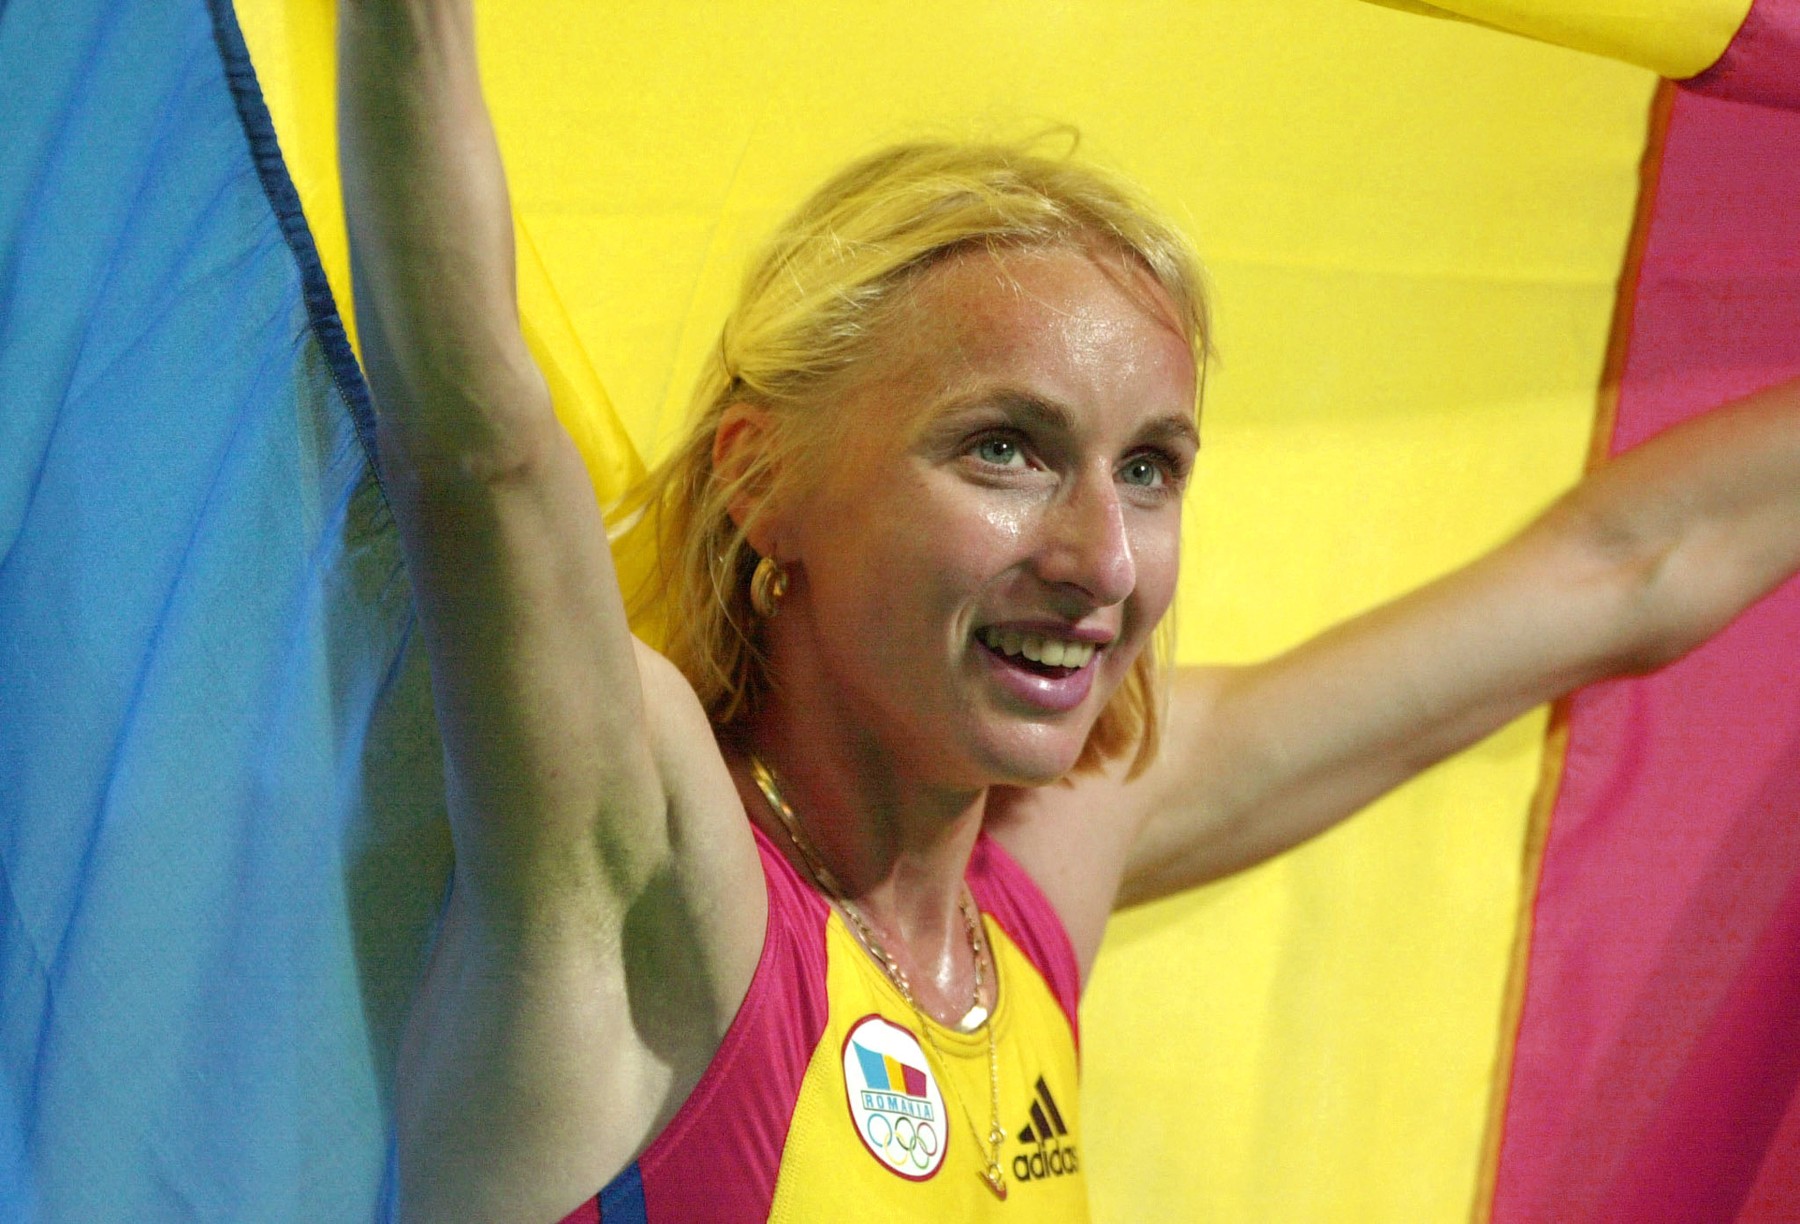 Romania's Gabriela Szabo exults while holding the Romanian flag after winning the Oympic 5,000m final lin Sydney 25 September 2000. Szabo clocked 14min 40.79sec to take the gold medal ahead of Ireland's Sonia O'Sullivan and Ethiopian Gete Wami.,Image: 17386826, License: Rights-managed, Restrictions: , Model Release: no, Credit line: Profimedia